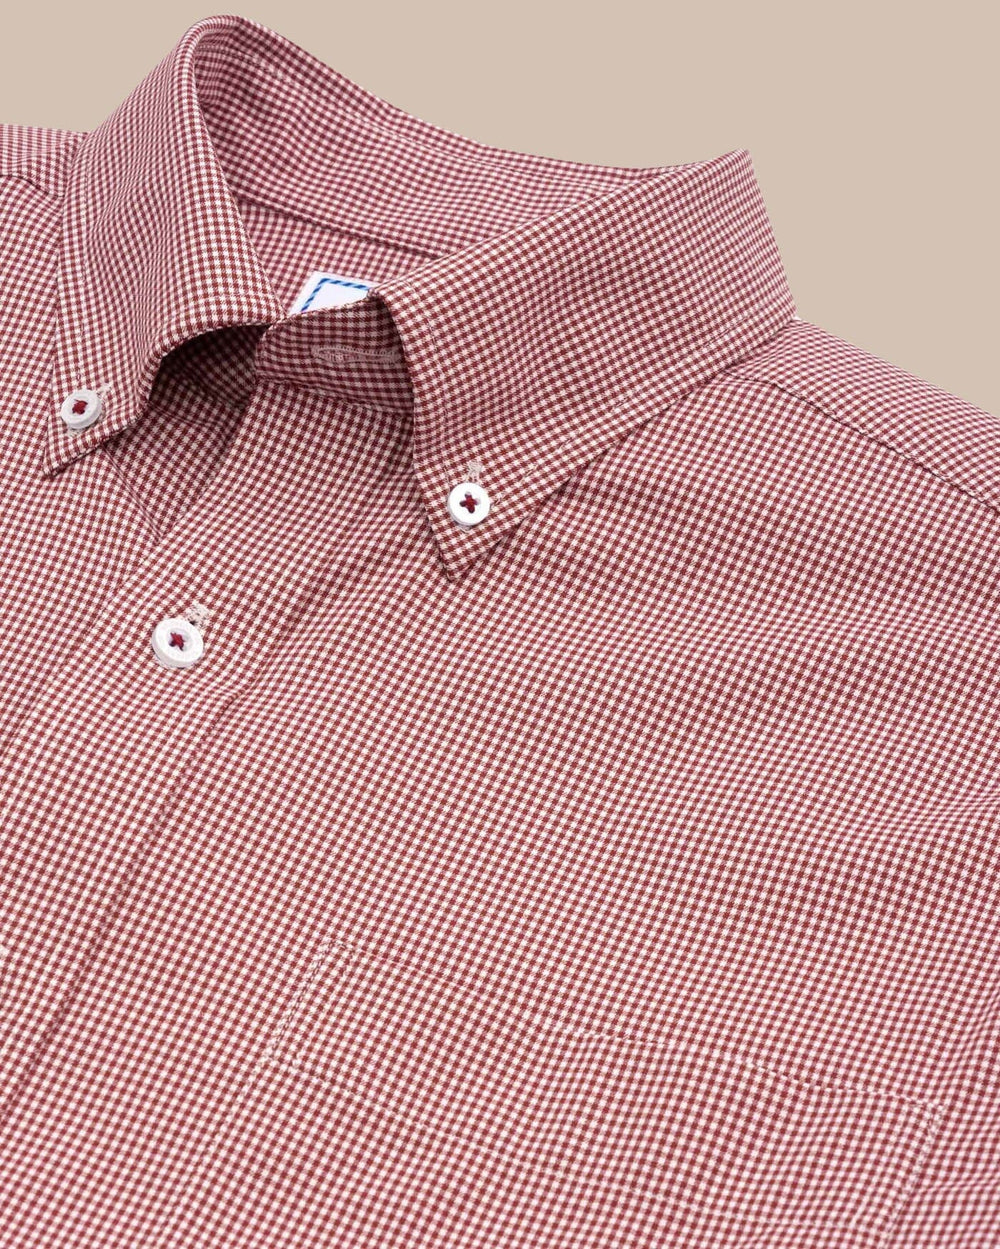 The detail view of the Southern Tide Team Colors Gingham Intercoastal Sport Shirt by Southern Tide - Crimson